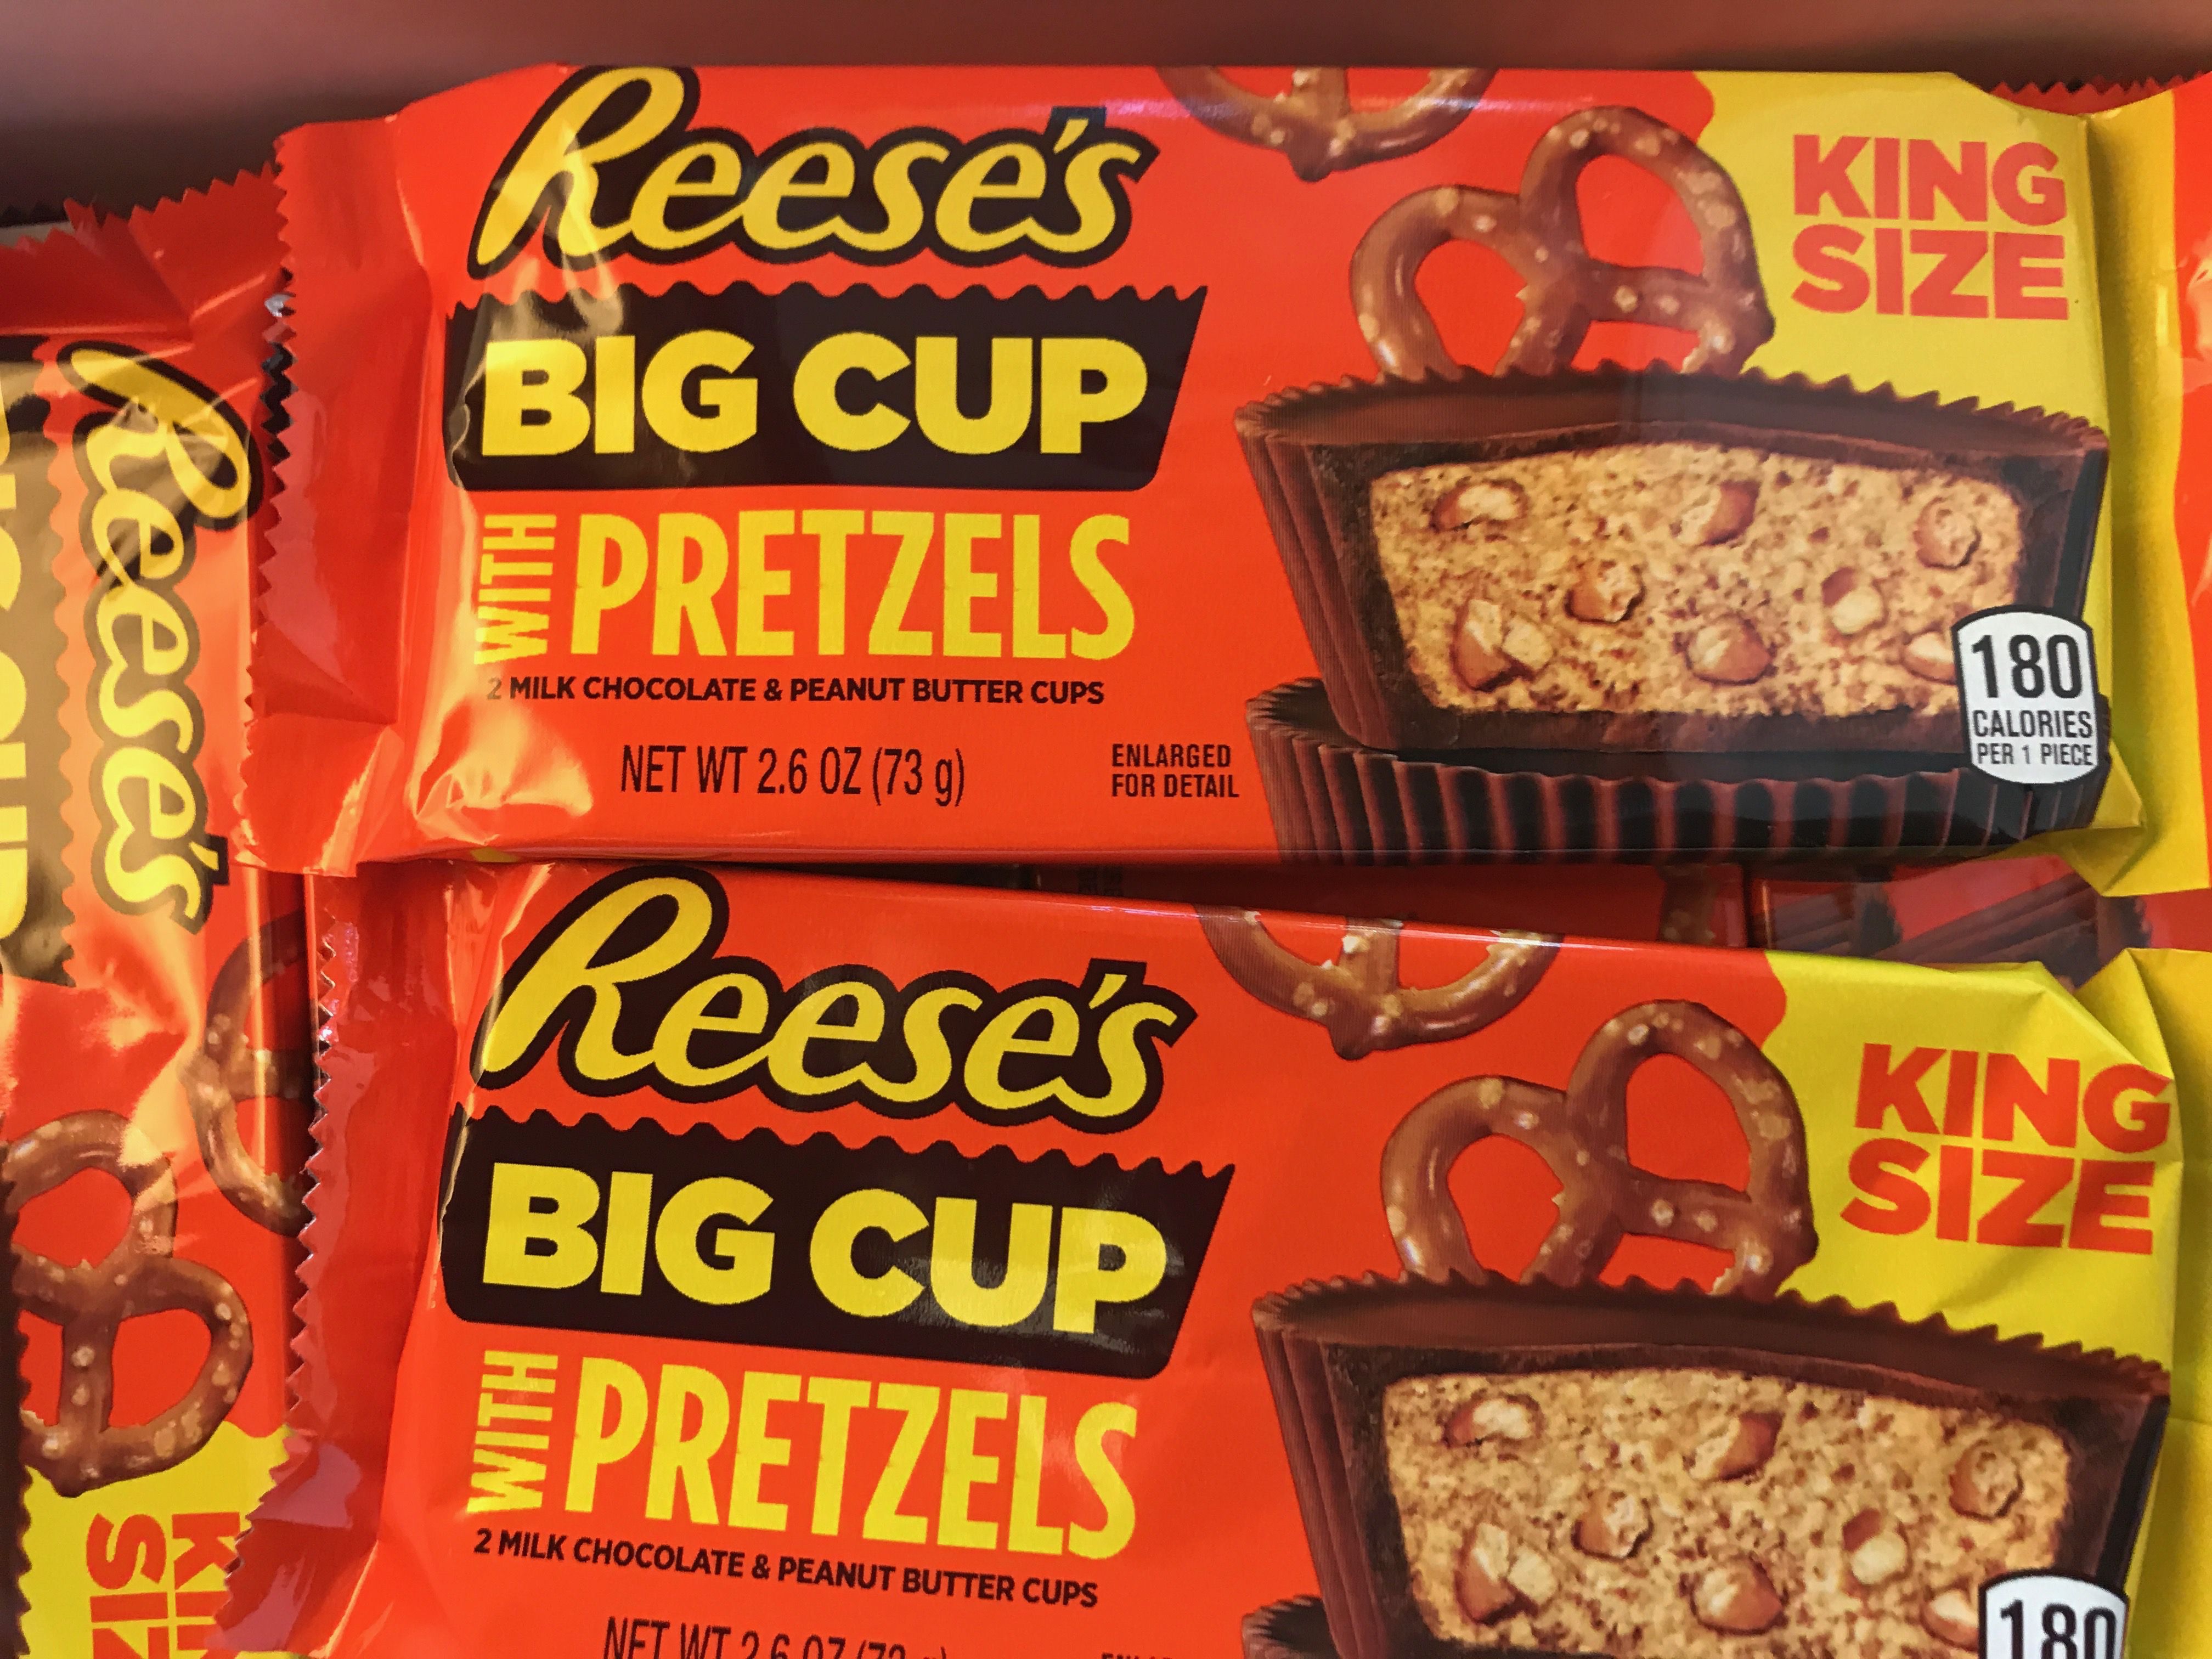 Reese's expanding brand is the 'economic engine' driving Hershey